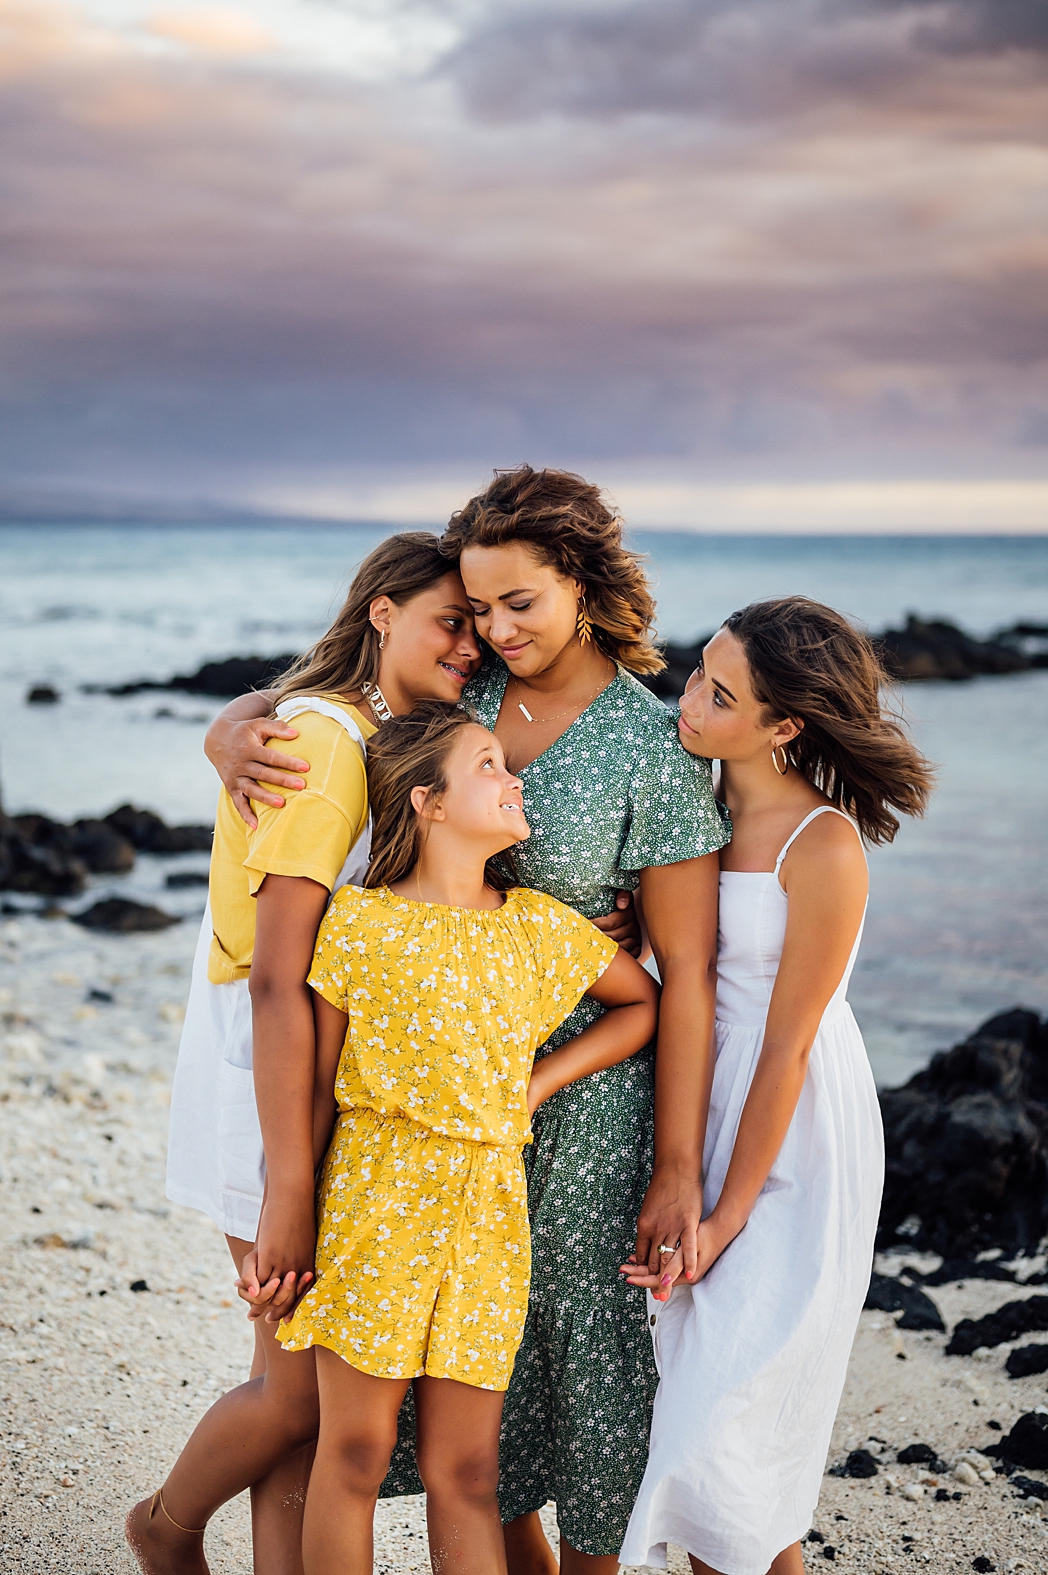 precious moments of mom and her daughters at a beach during their vacation